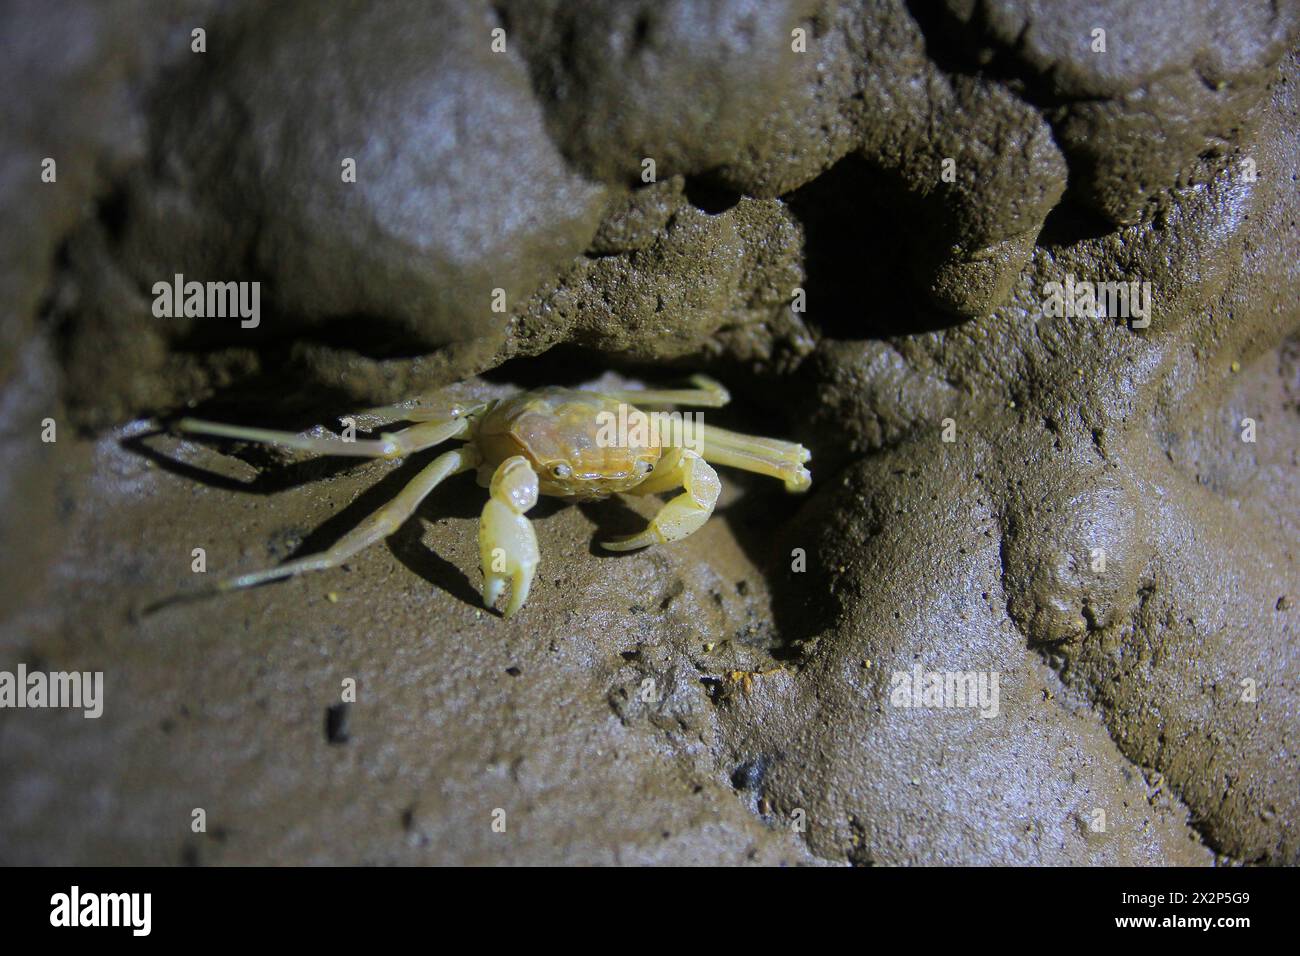 Sesamoides Jacobsoni, cave biota that lives in the Karst area of Gunung Sewu. This type of crab was first discovered by Edward Jacobson in 1911. Stock Photo